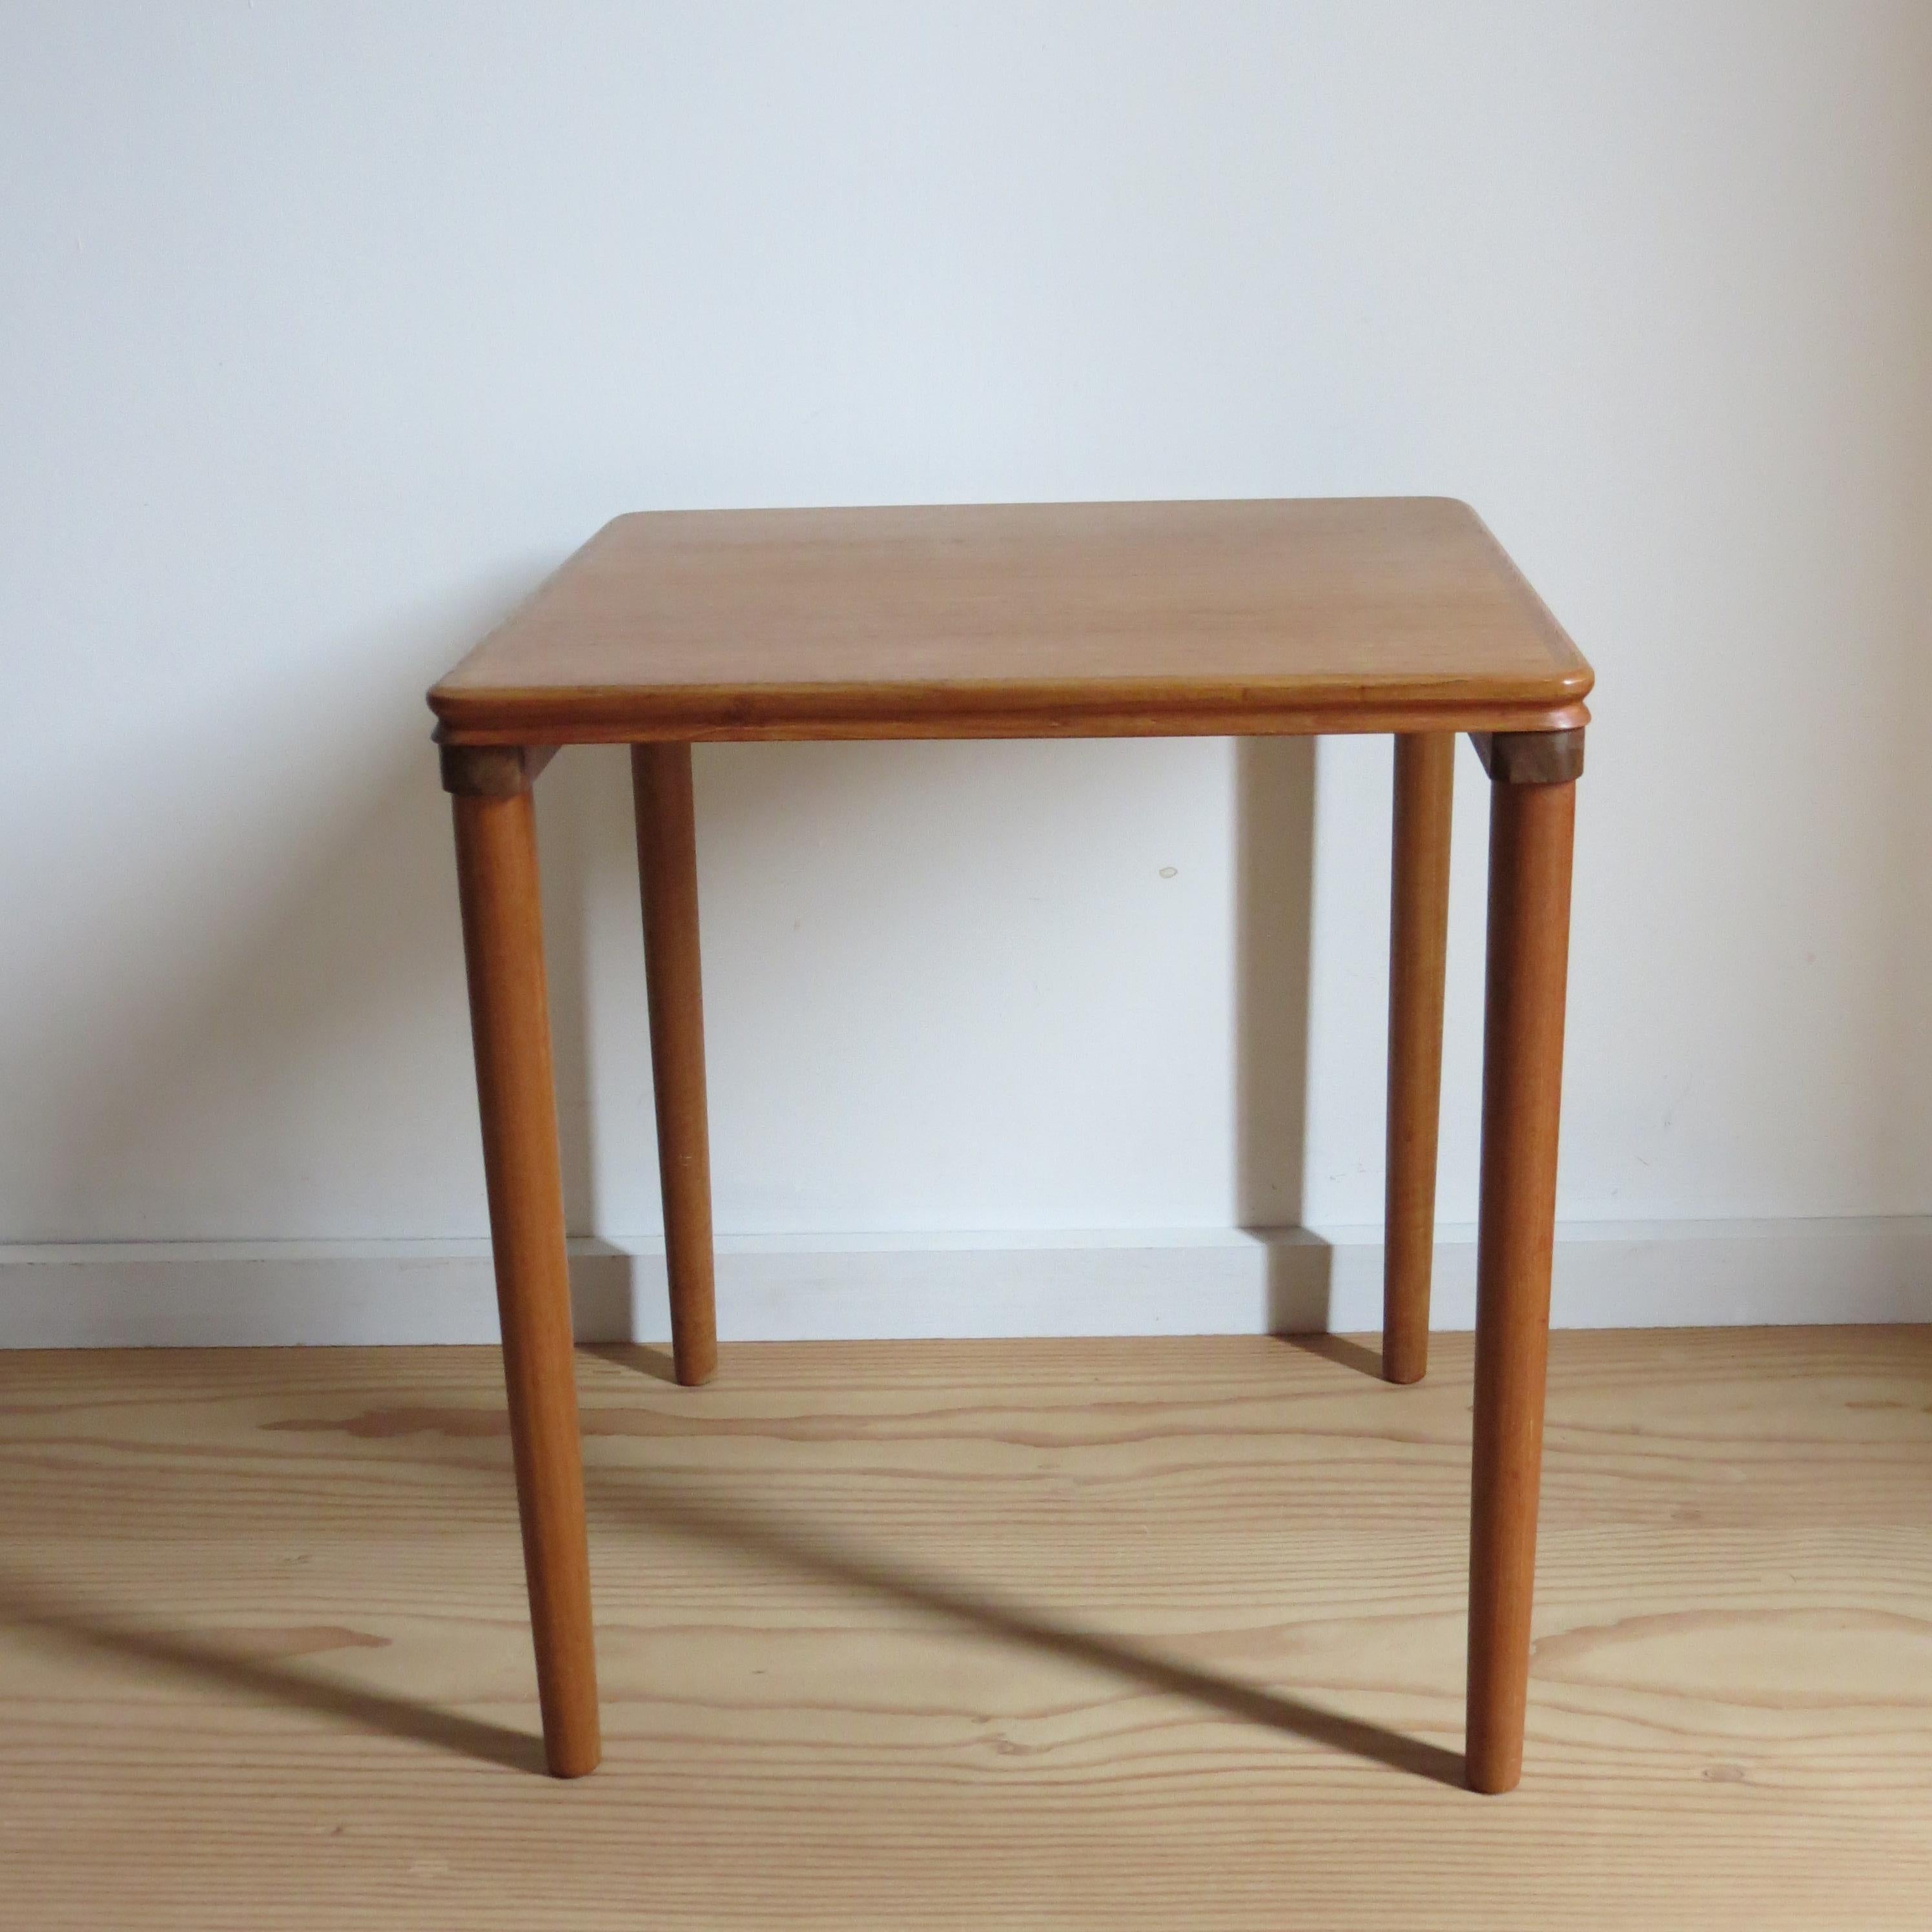 Very nice side table manufactured by Bramin, Denmark. 
Teak legs and Teak top, legs unscrew for ease of postage.
Designed by H W Klein and manufactured by Bramin Denmark
Dates from the 1960s 
In good over all condition 
ST1607
Please note the legs